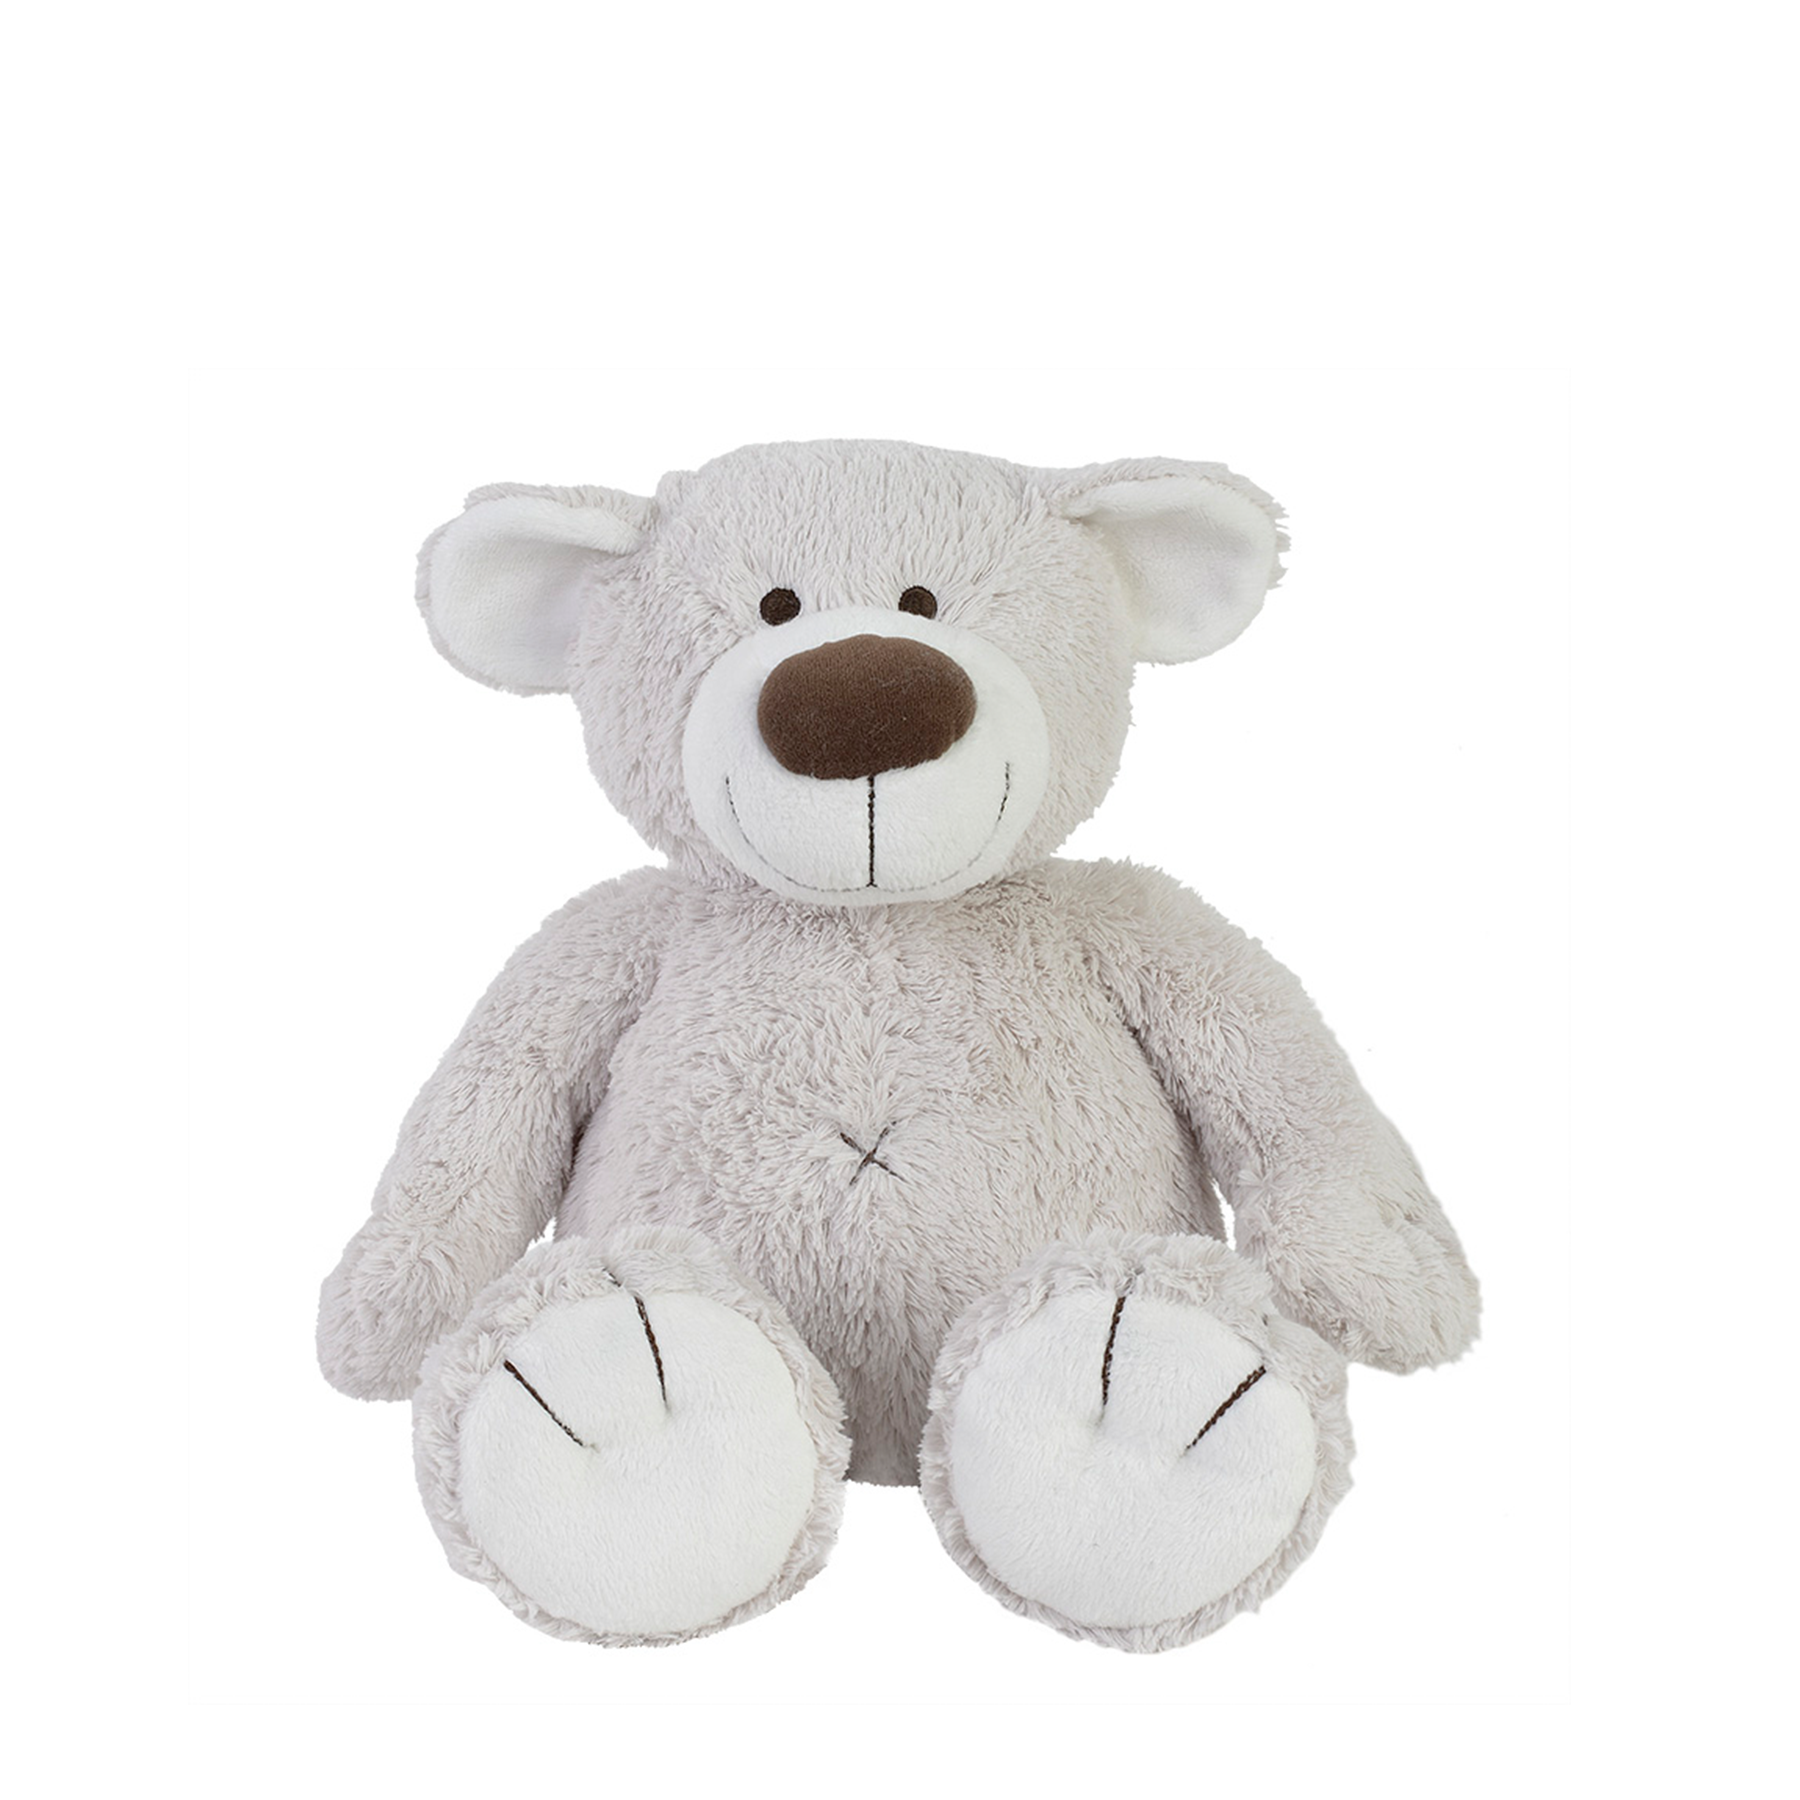 Teddy Bear Baggio No1 (22cm) from Happy Horse is very soft and super cuddly .  He is light fawn in colour with a large brown nose and friendly smile.